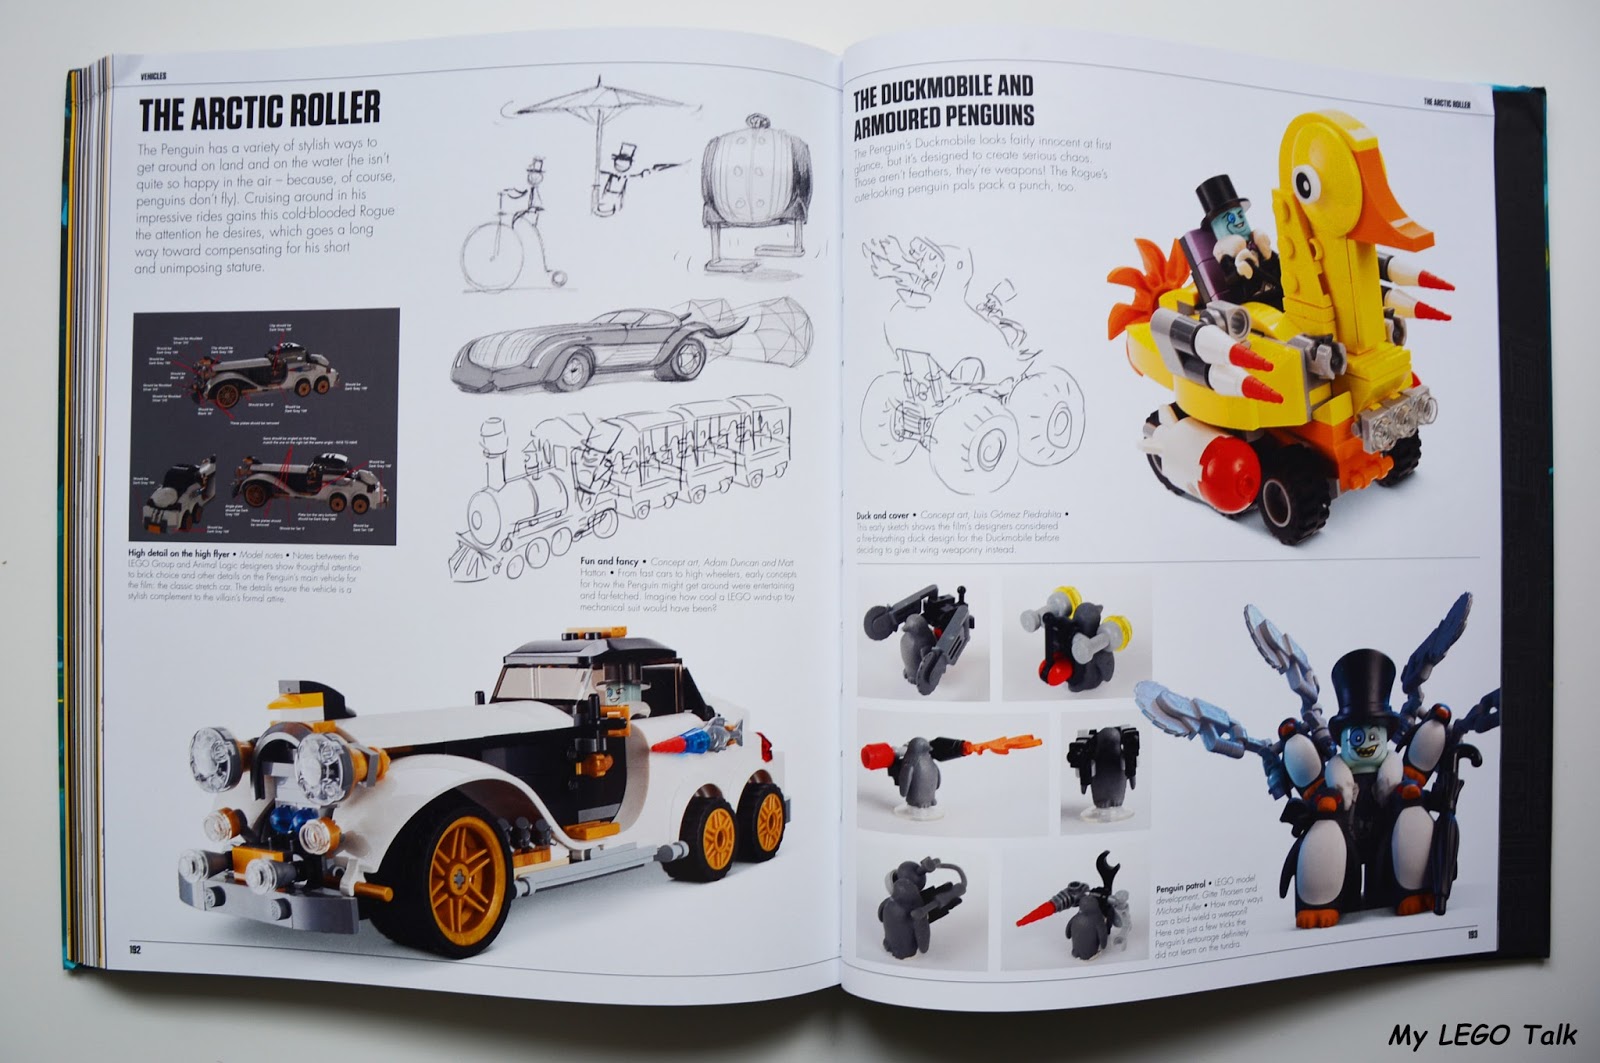 The Making of the Movie by DK Publishing - book about The LEGO Batman Movie  - My Lego Talk